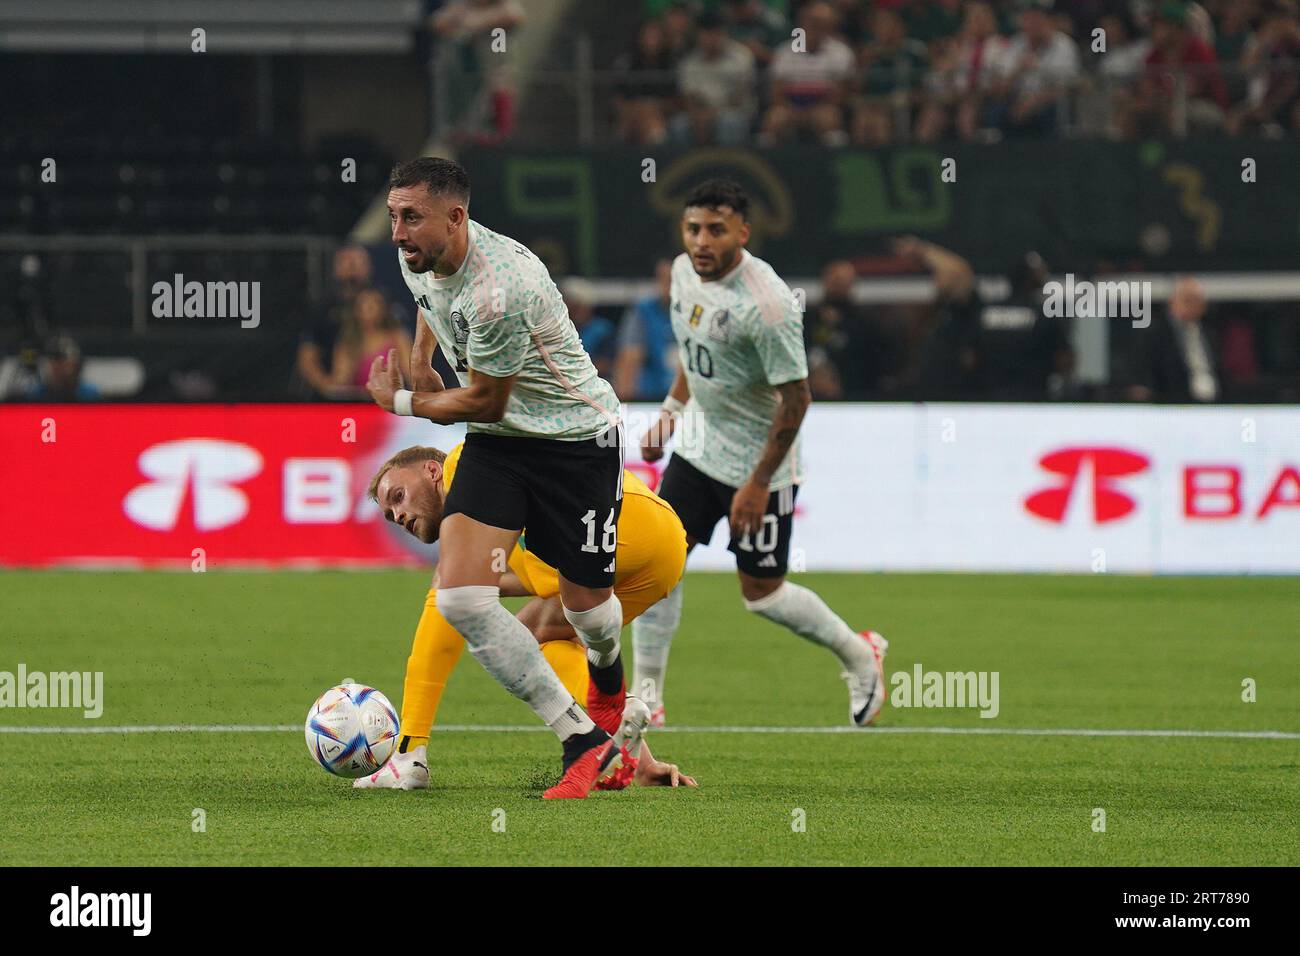 Arlington, Texas, United States: Hector Herrera (MX) in action during the international soccer game between Mexico and Australia played at AT&T Stadium on Saturday September 9, 2023.  (Photo by Javier Vicencio / Eyepix Group/Sipa USA) Stock Photo